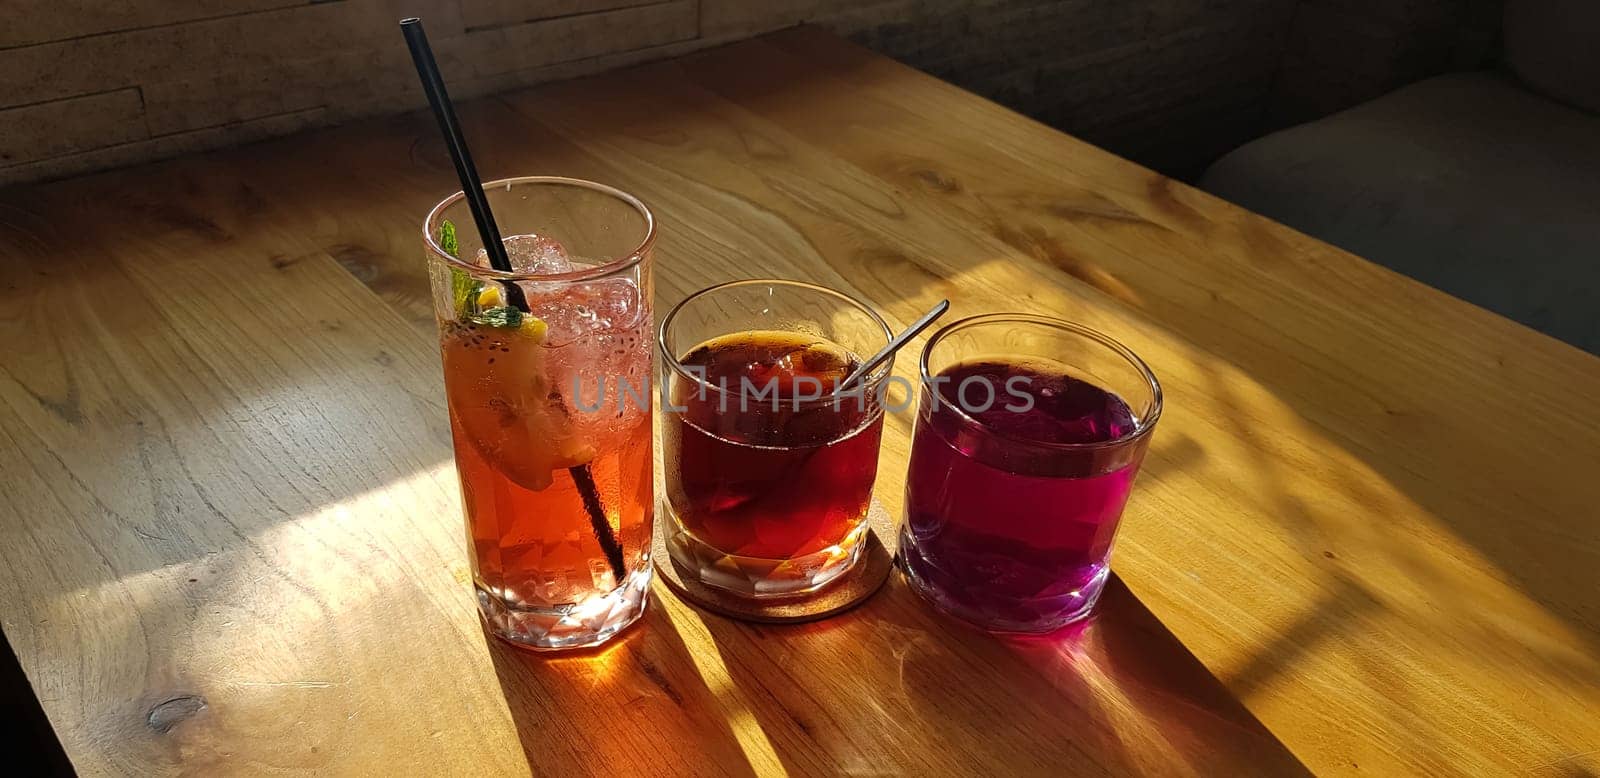 Transparent Glasses with sweet drinks inside with colorful drink, with shadow and table background with ice cubes by antoksena